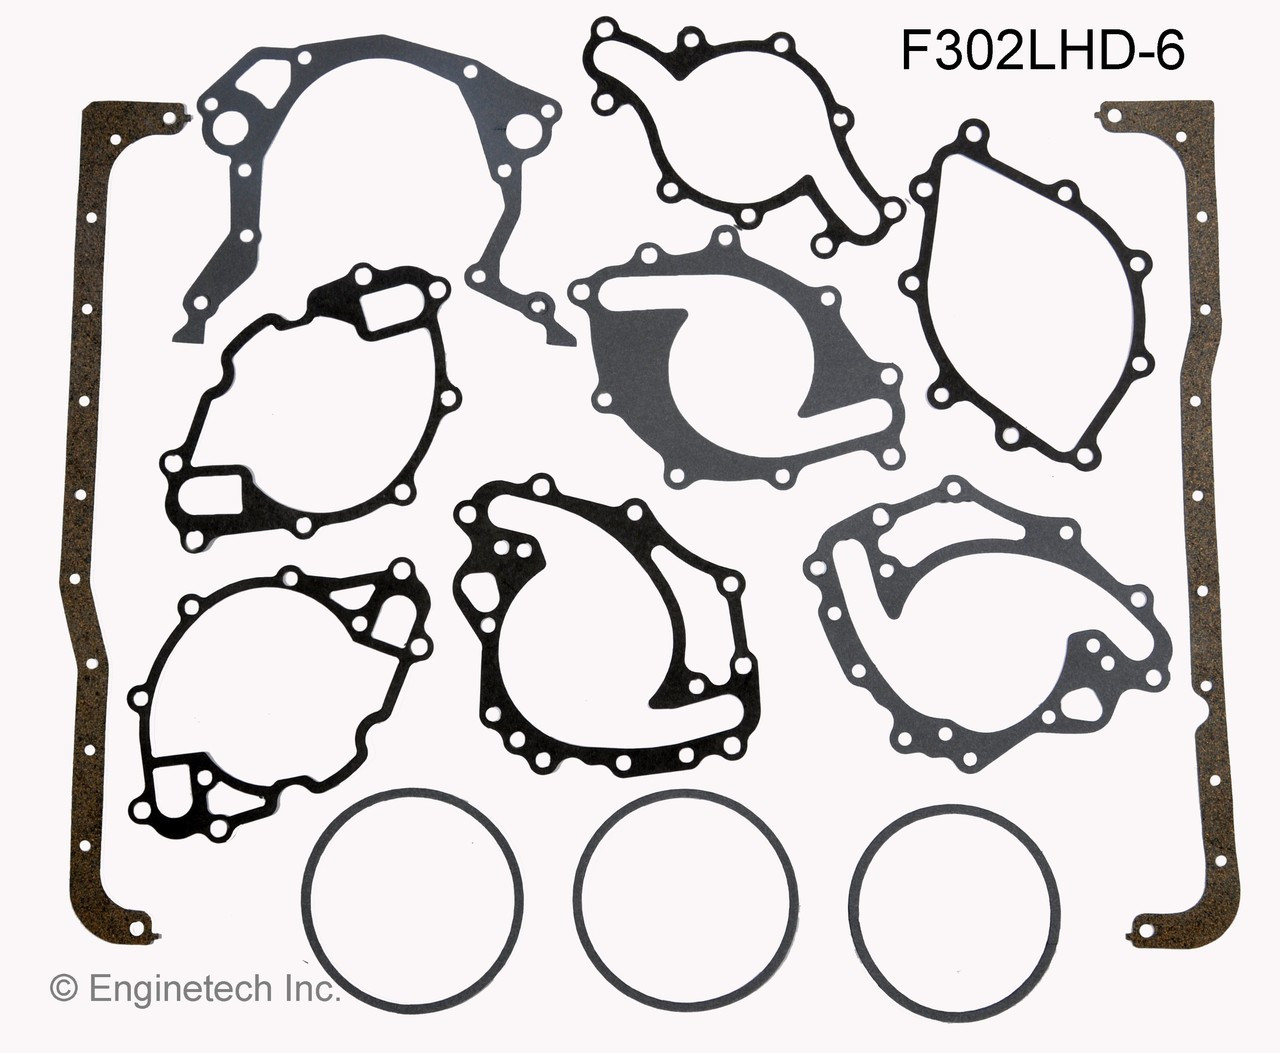 1991 Ford Country Squire 5.0L Engine Gasket Set F302LHD-6 -83